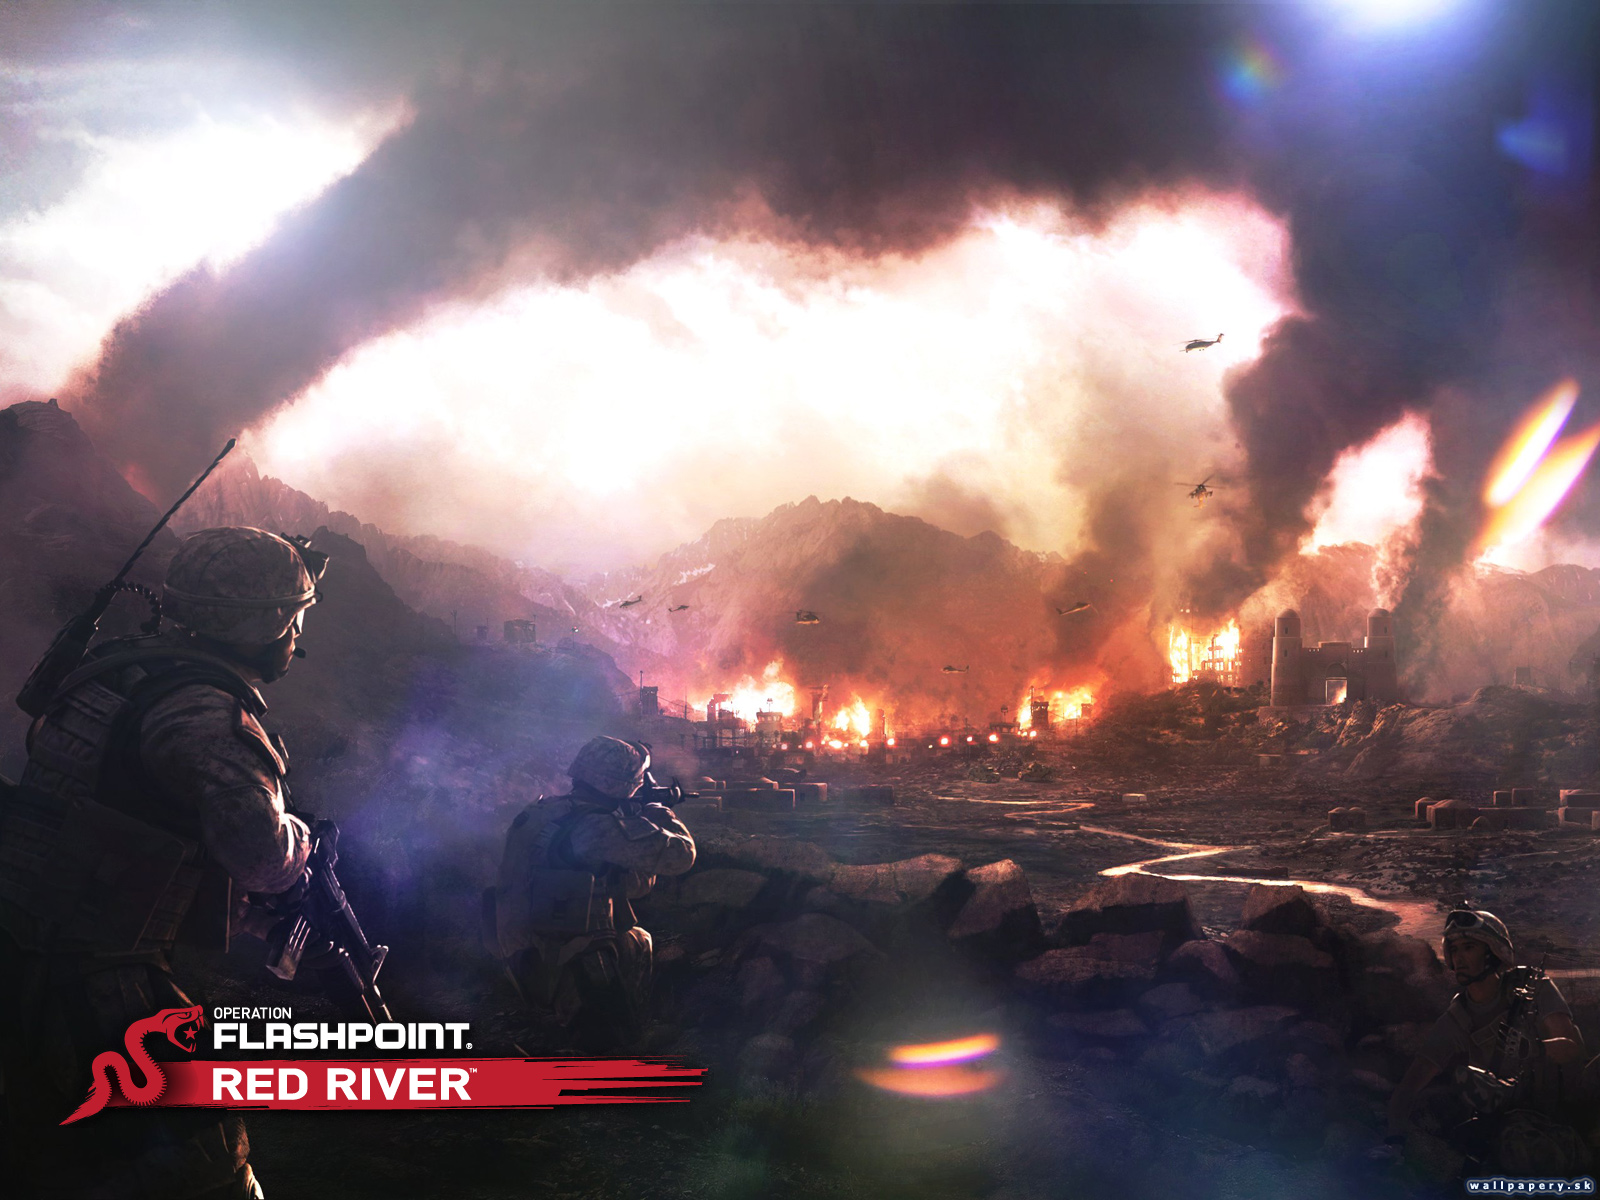 Operation Flashpoint: Red River - wallpaper 8